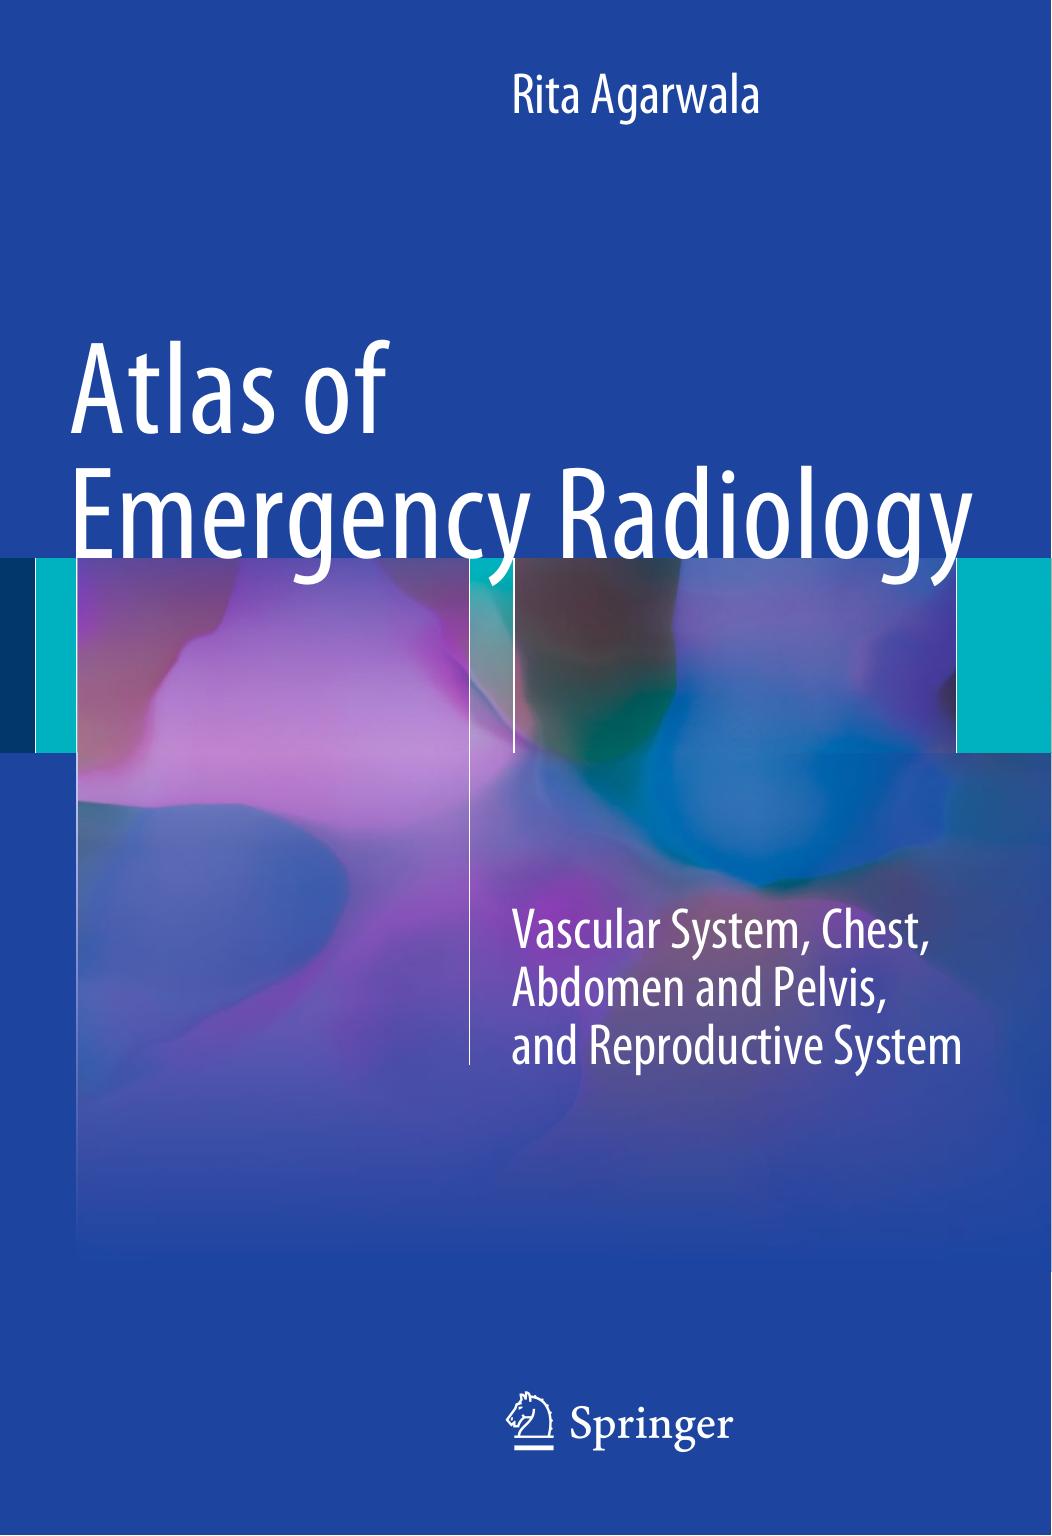 Atlas of Emergency Radiology  Vascular System, Chest, Abdomen and Pelvis, and Reproductive System ( PDFDrive.com )